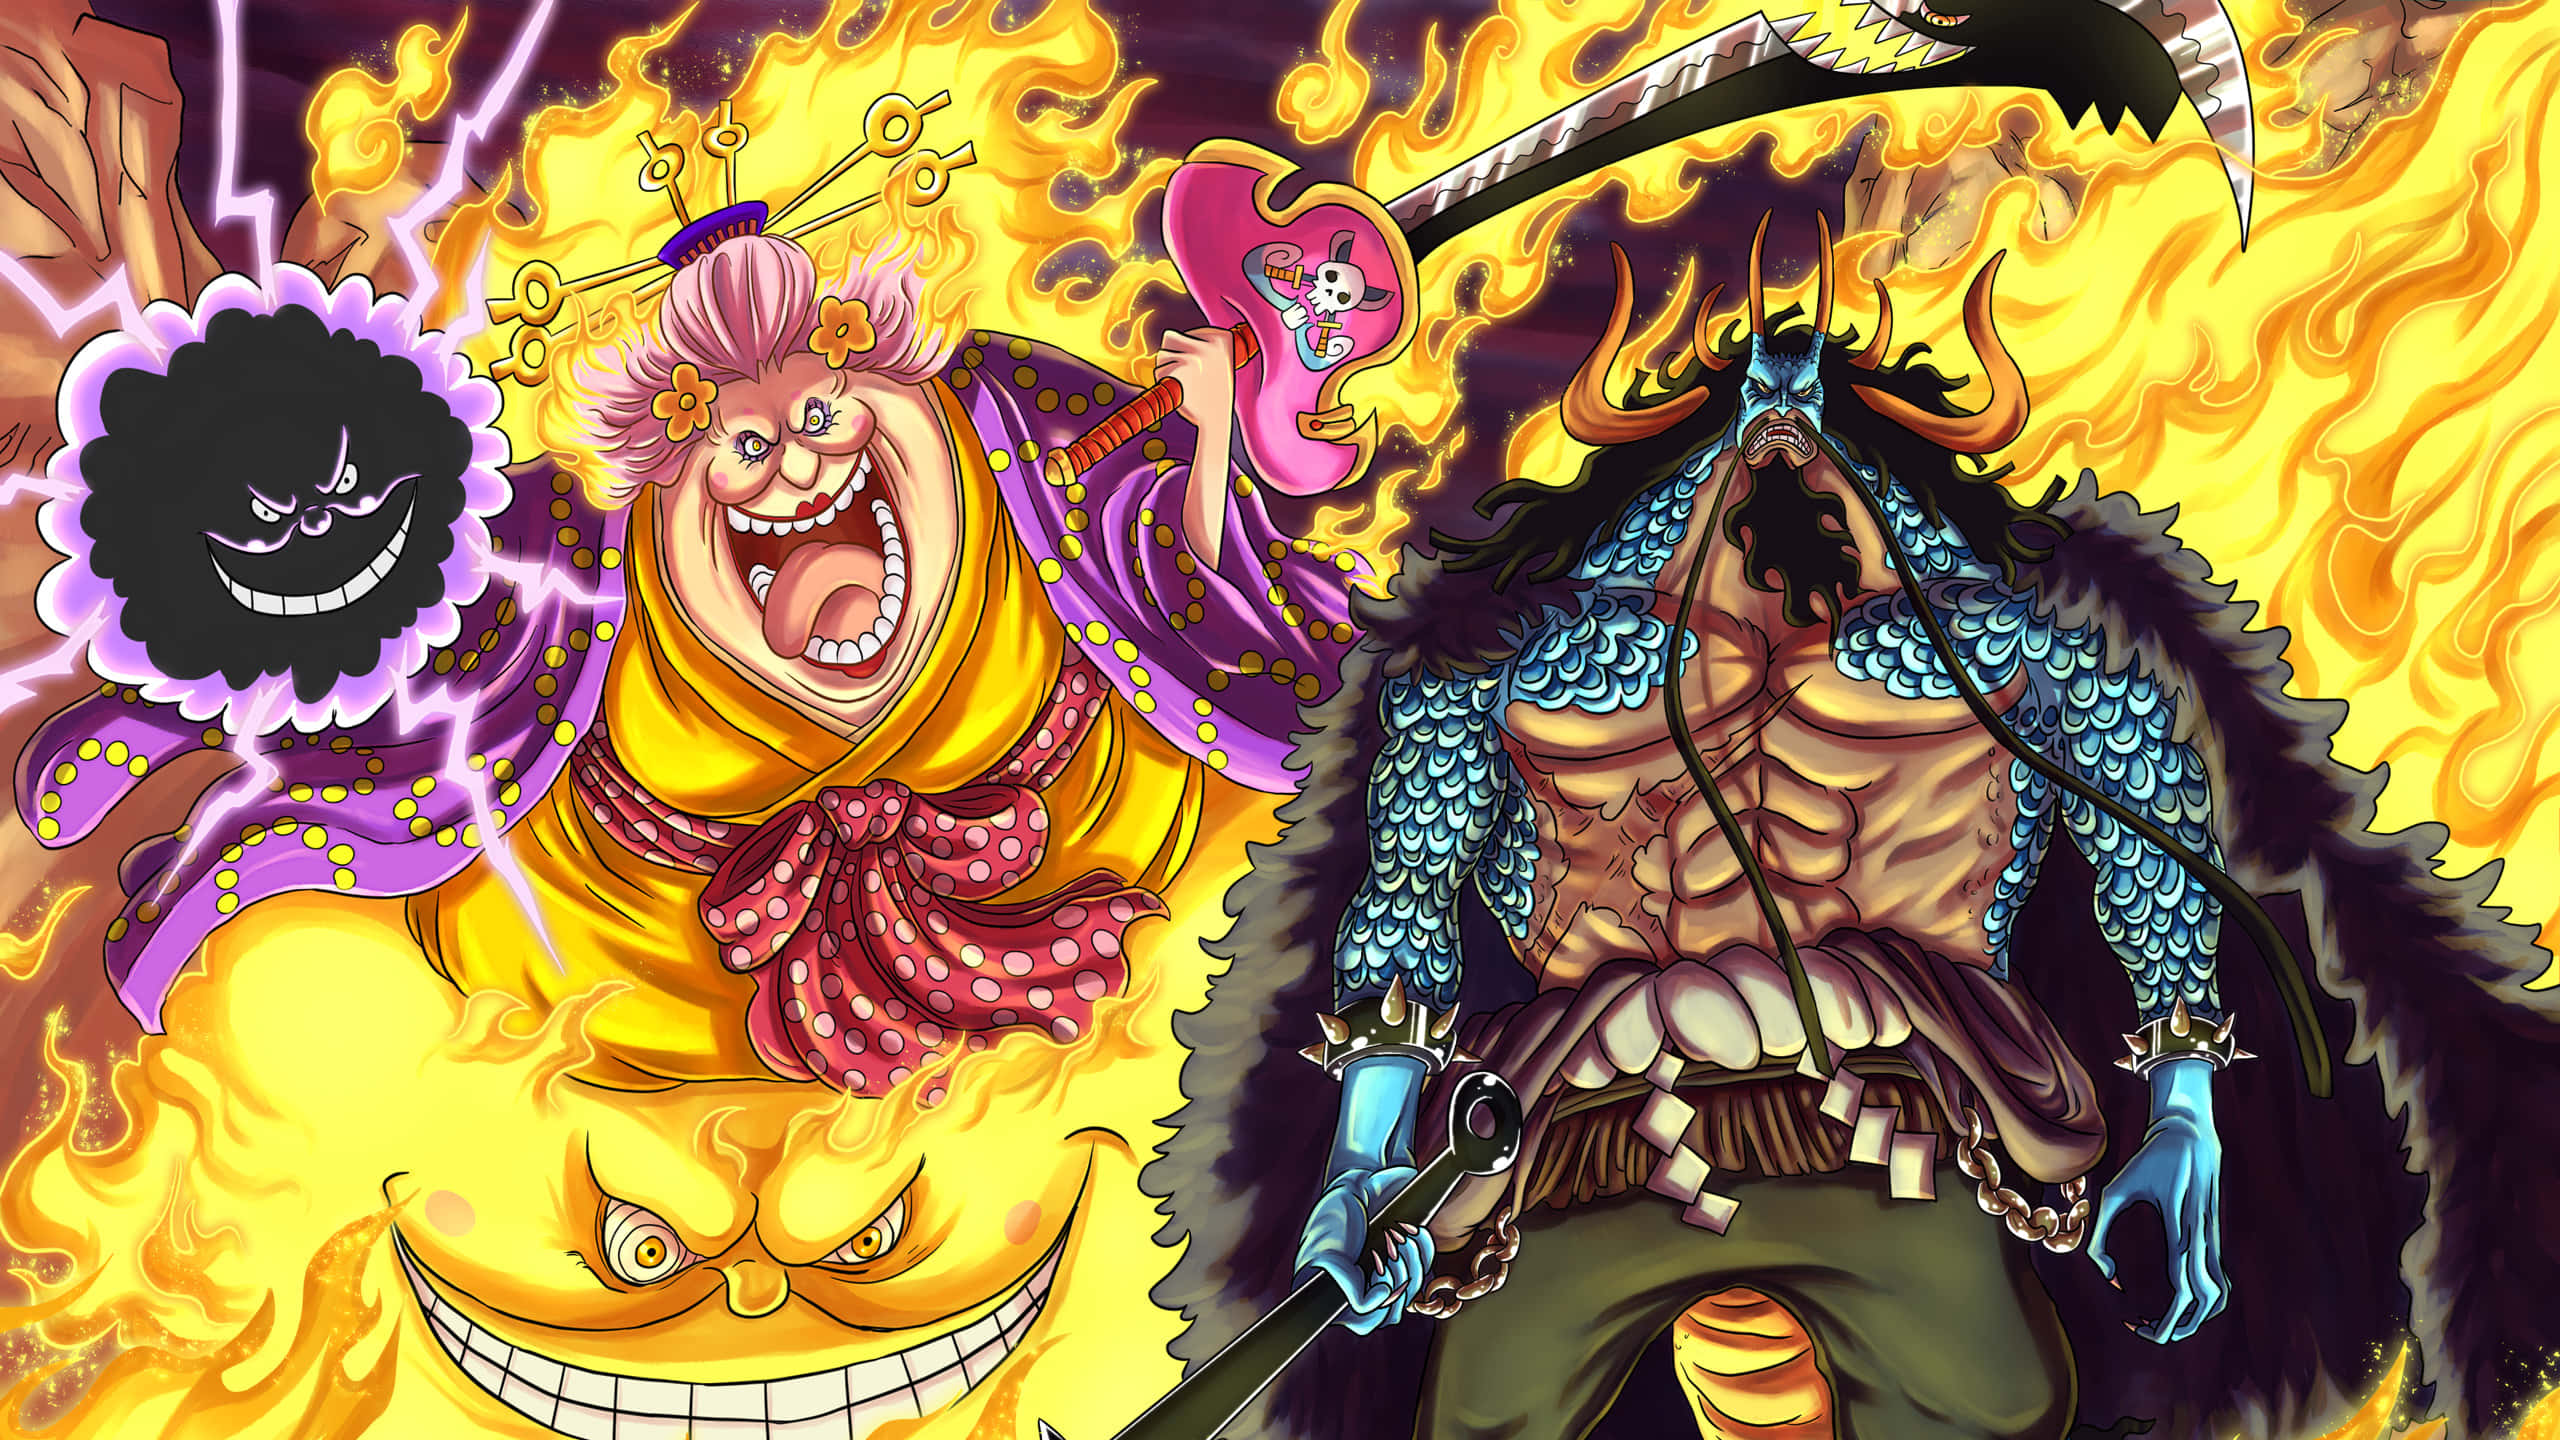 Fierce Pirate Kaido Stands Tall In Front Of The Bounty Hanging From His Arm To Declare His Power